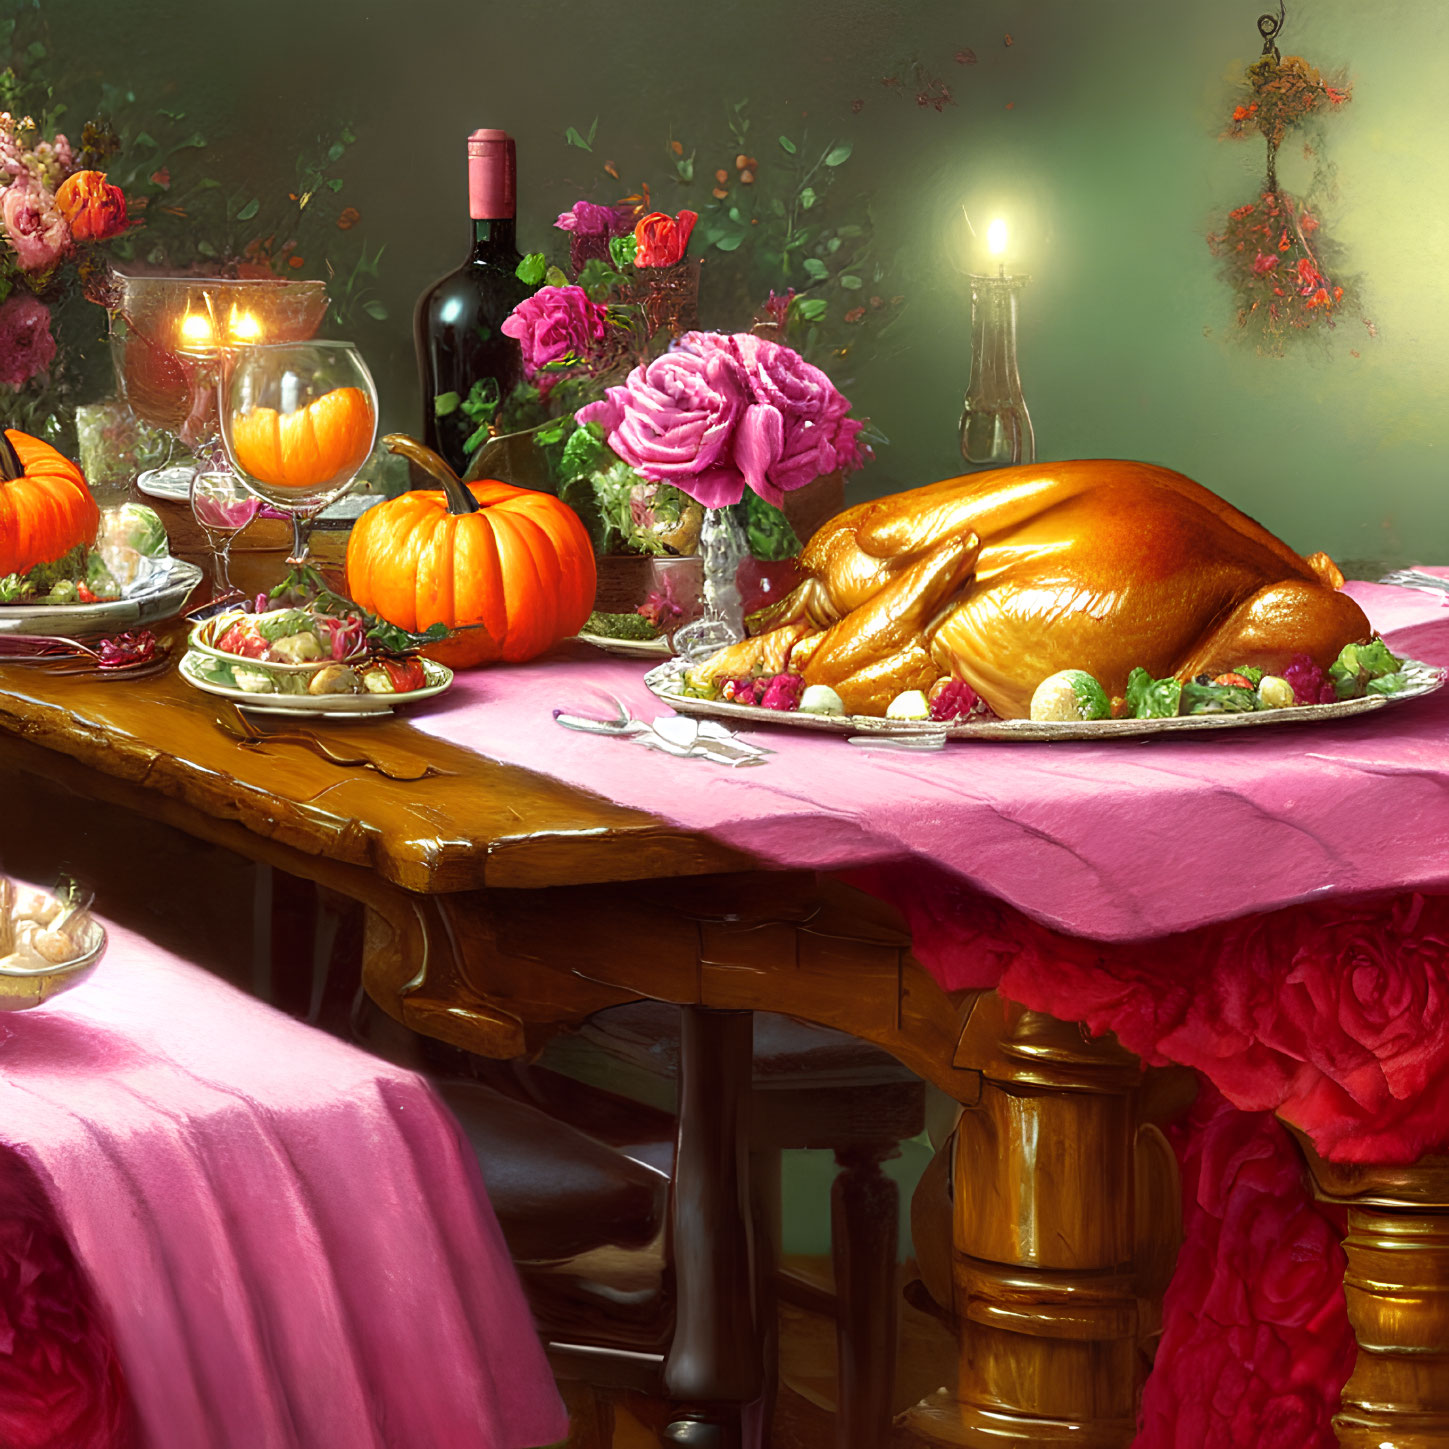 Festive Thanksgiving table with roasted turkey, wine, candlelight, flowers, and pumpkins